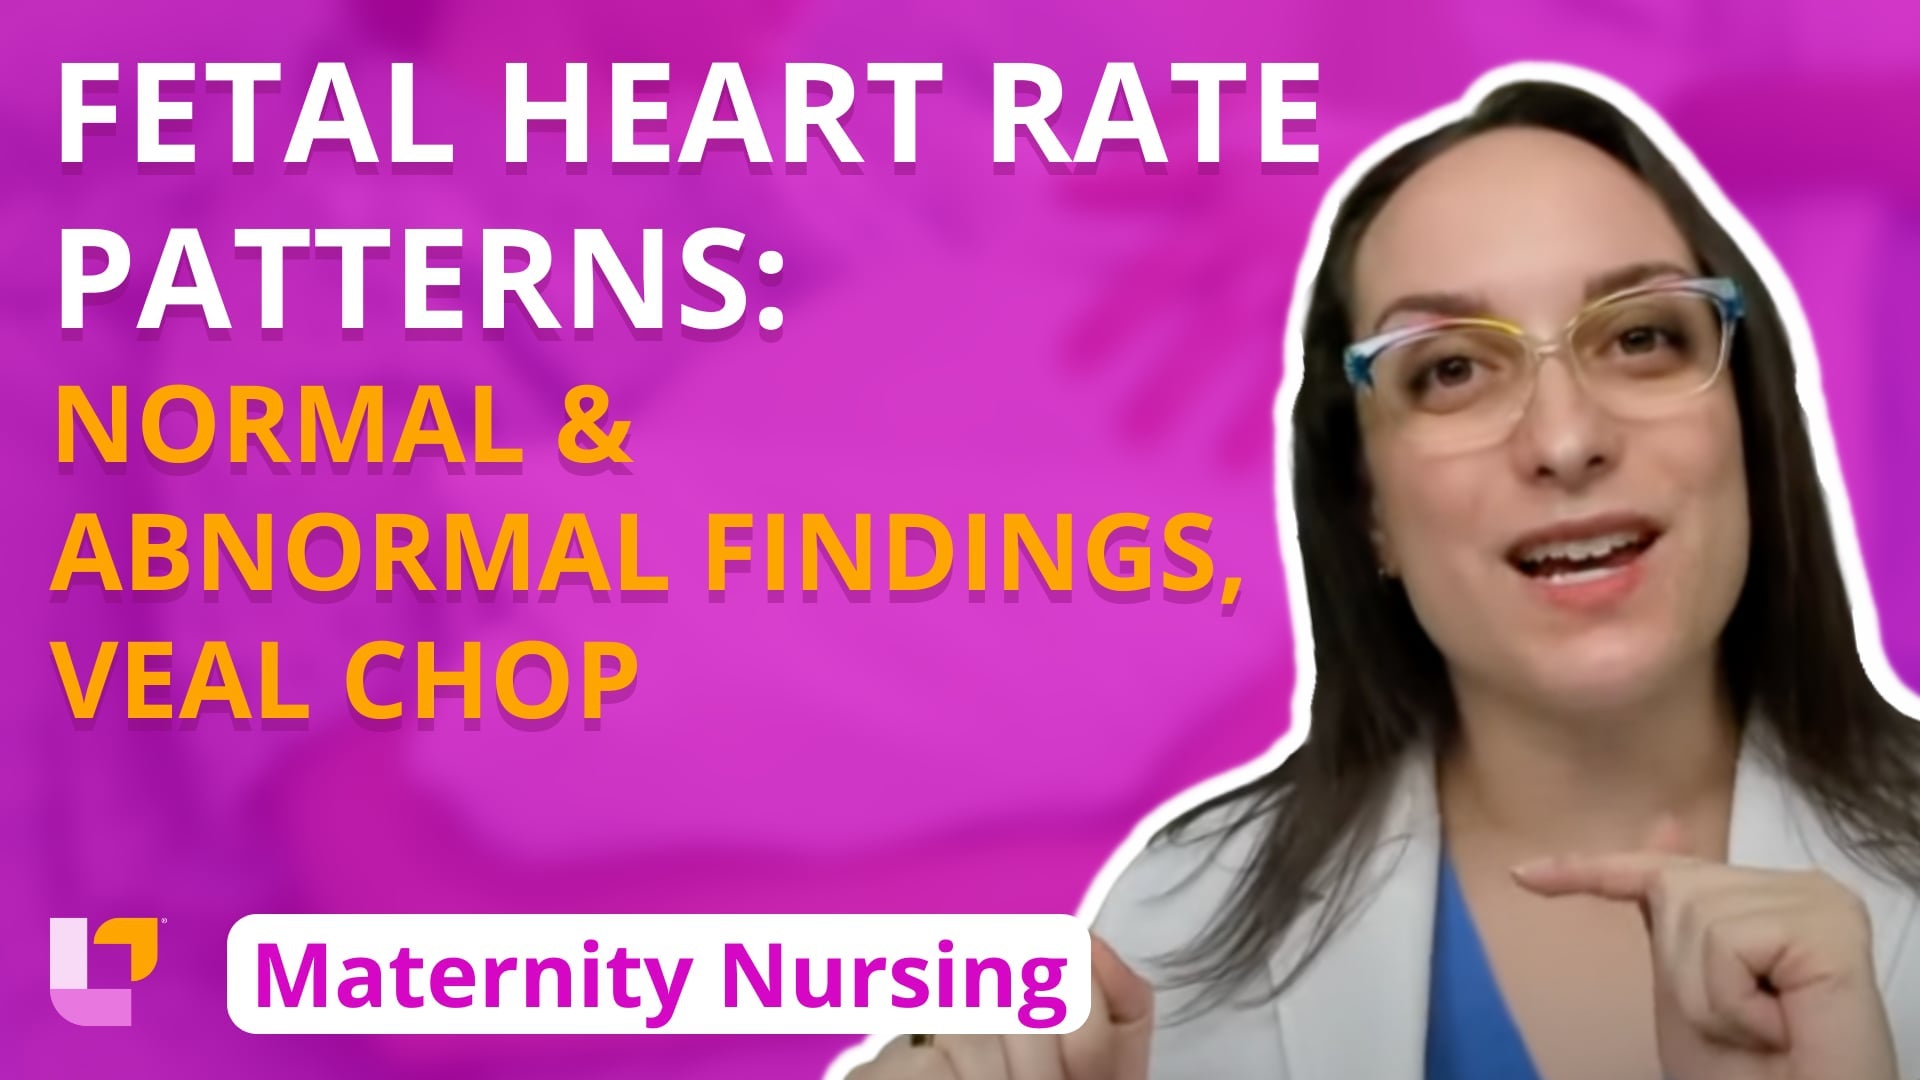 Maternity - L&D, part 6: Fetal Heart Rate Patterns - Normal and Abnormal Findings, VEAL CHOP - LevelUpRN